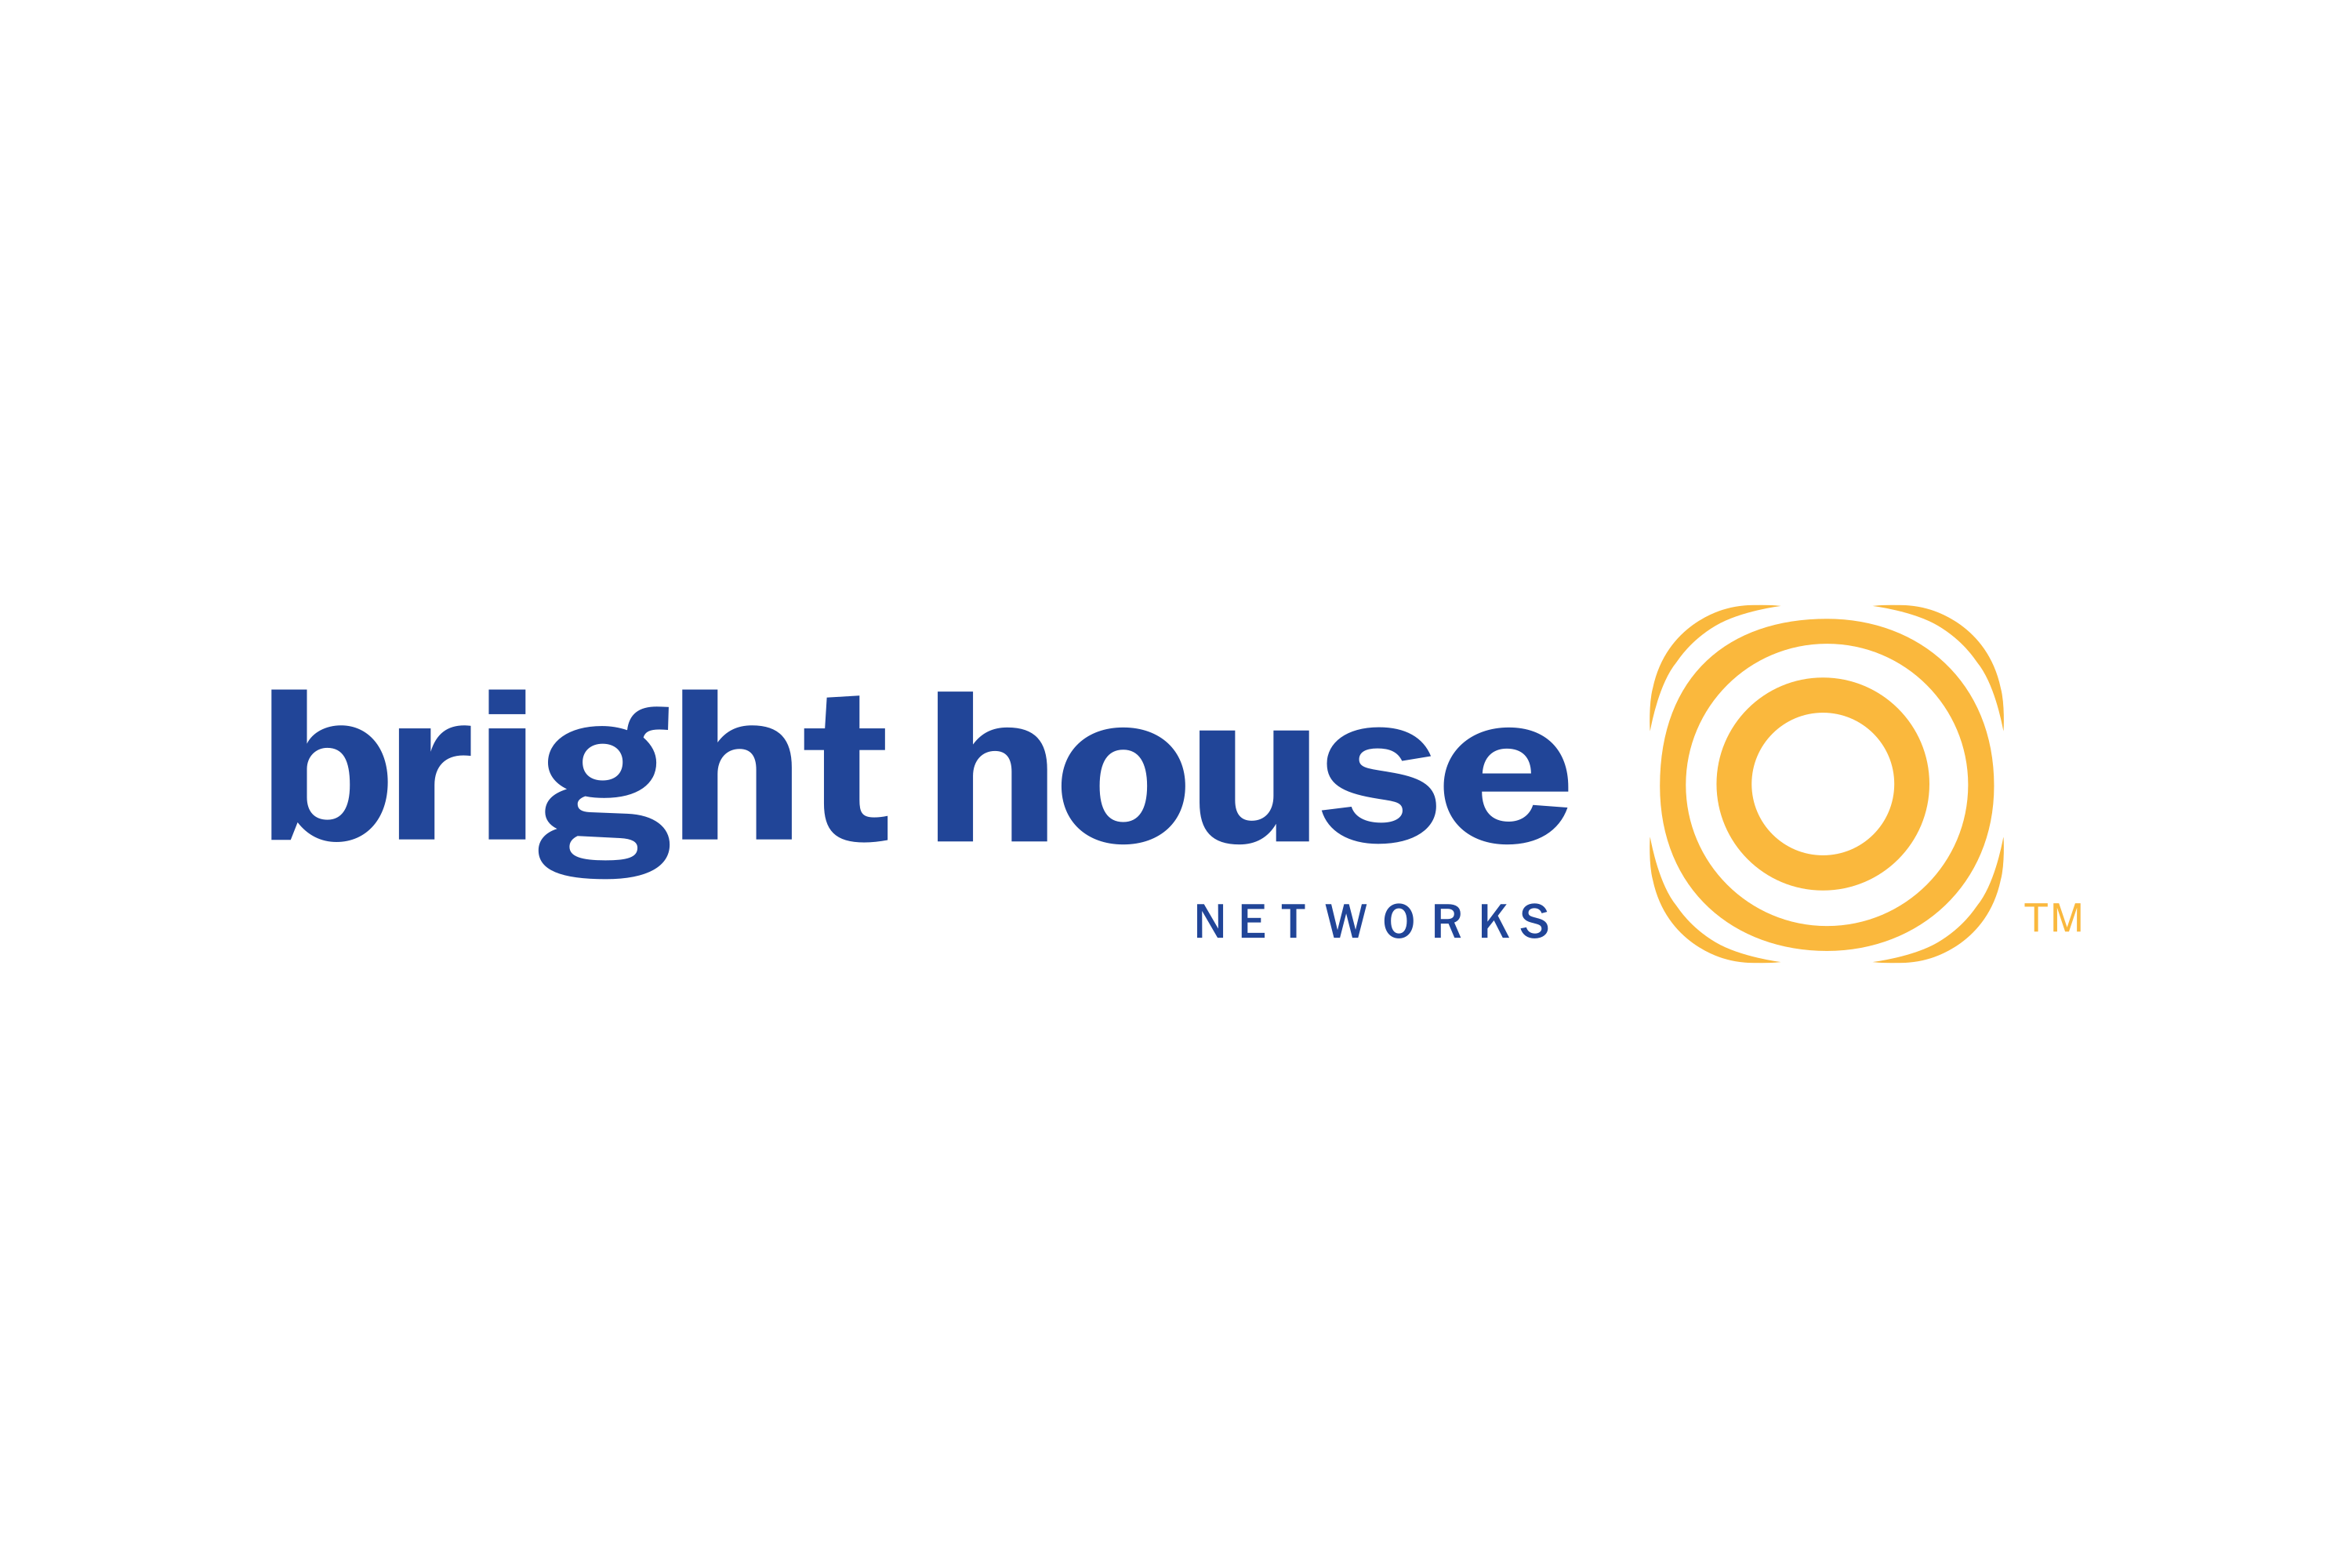 Bright House Networks Logo - Free download logo in SVG or PNG format